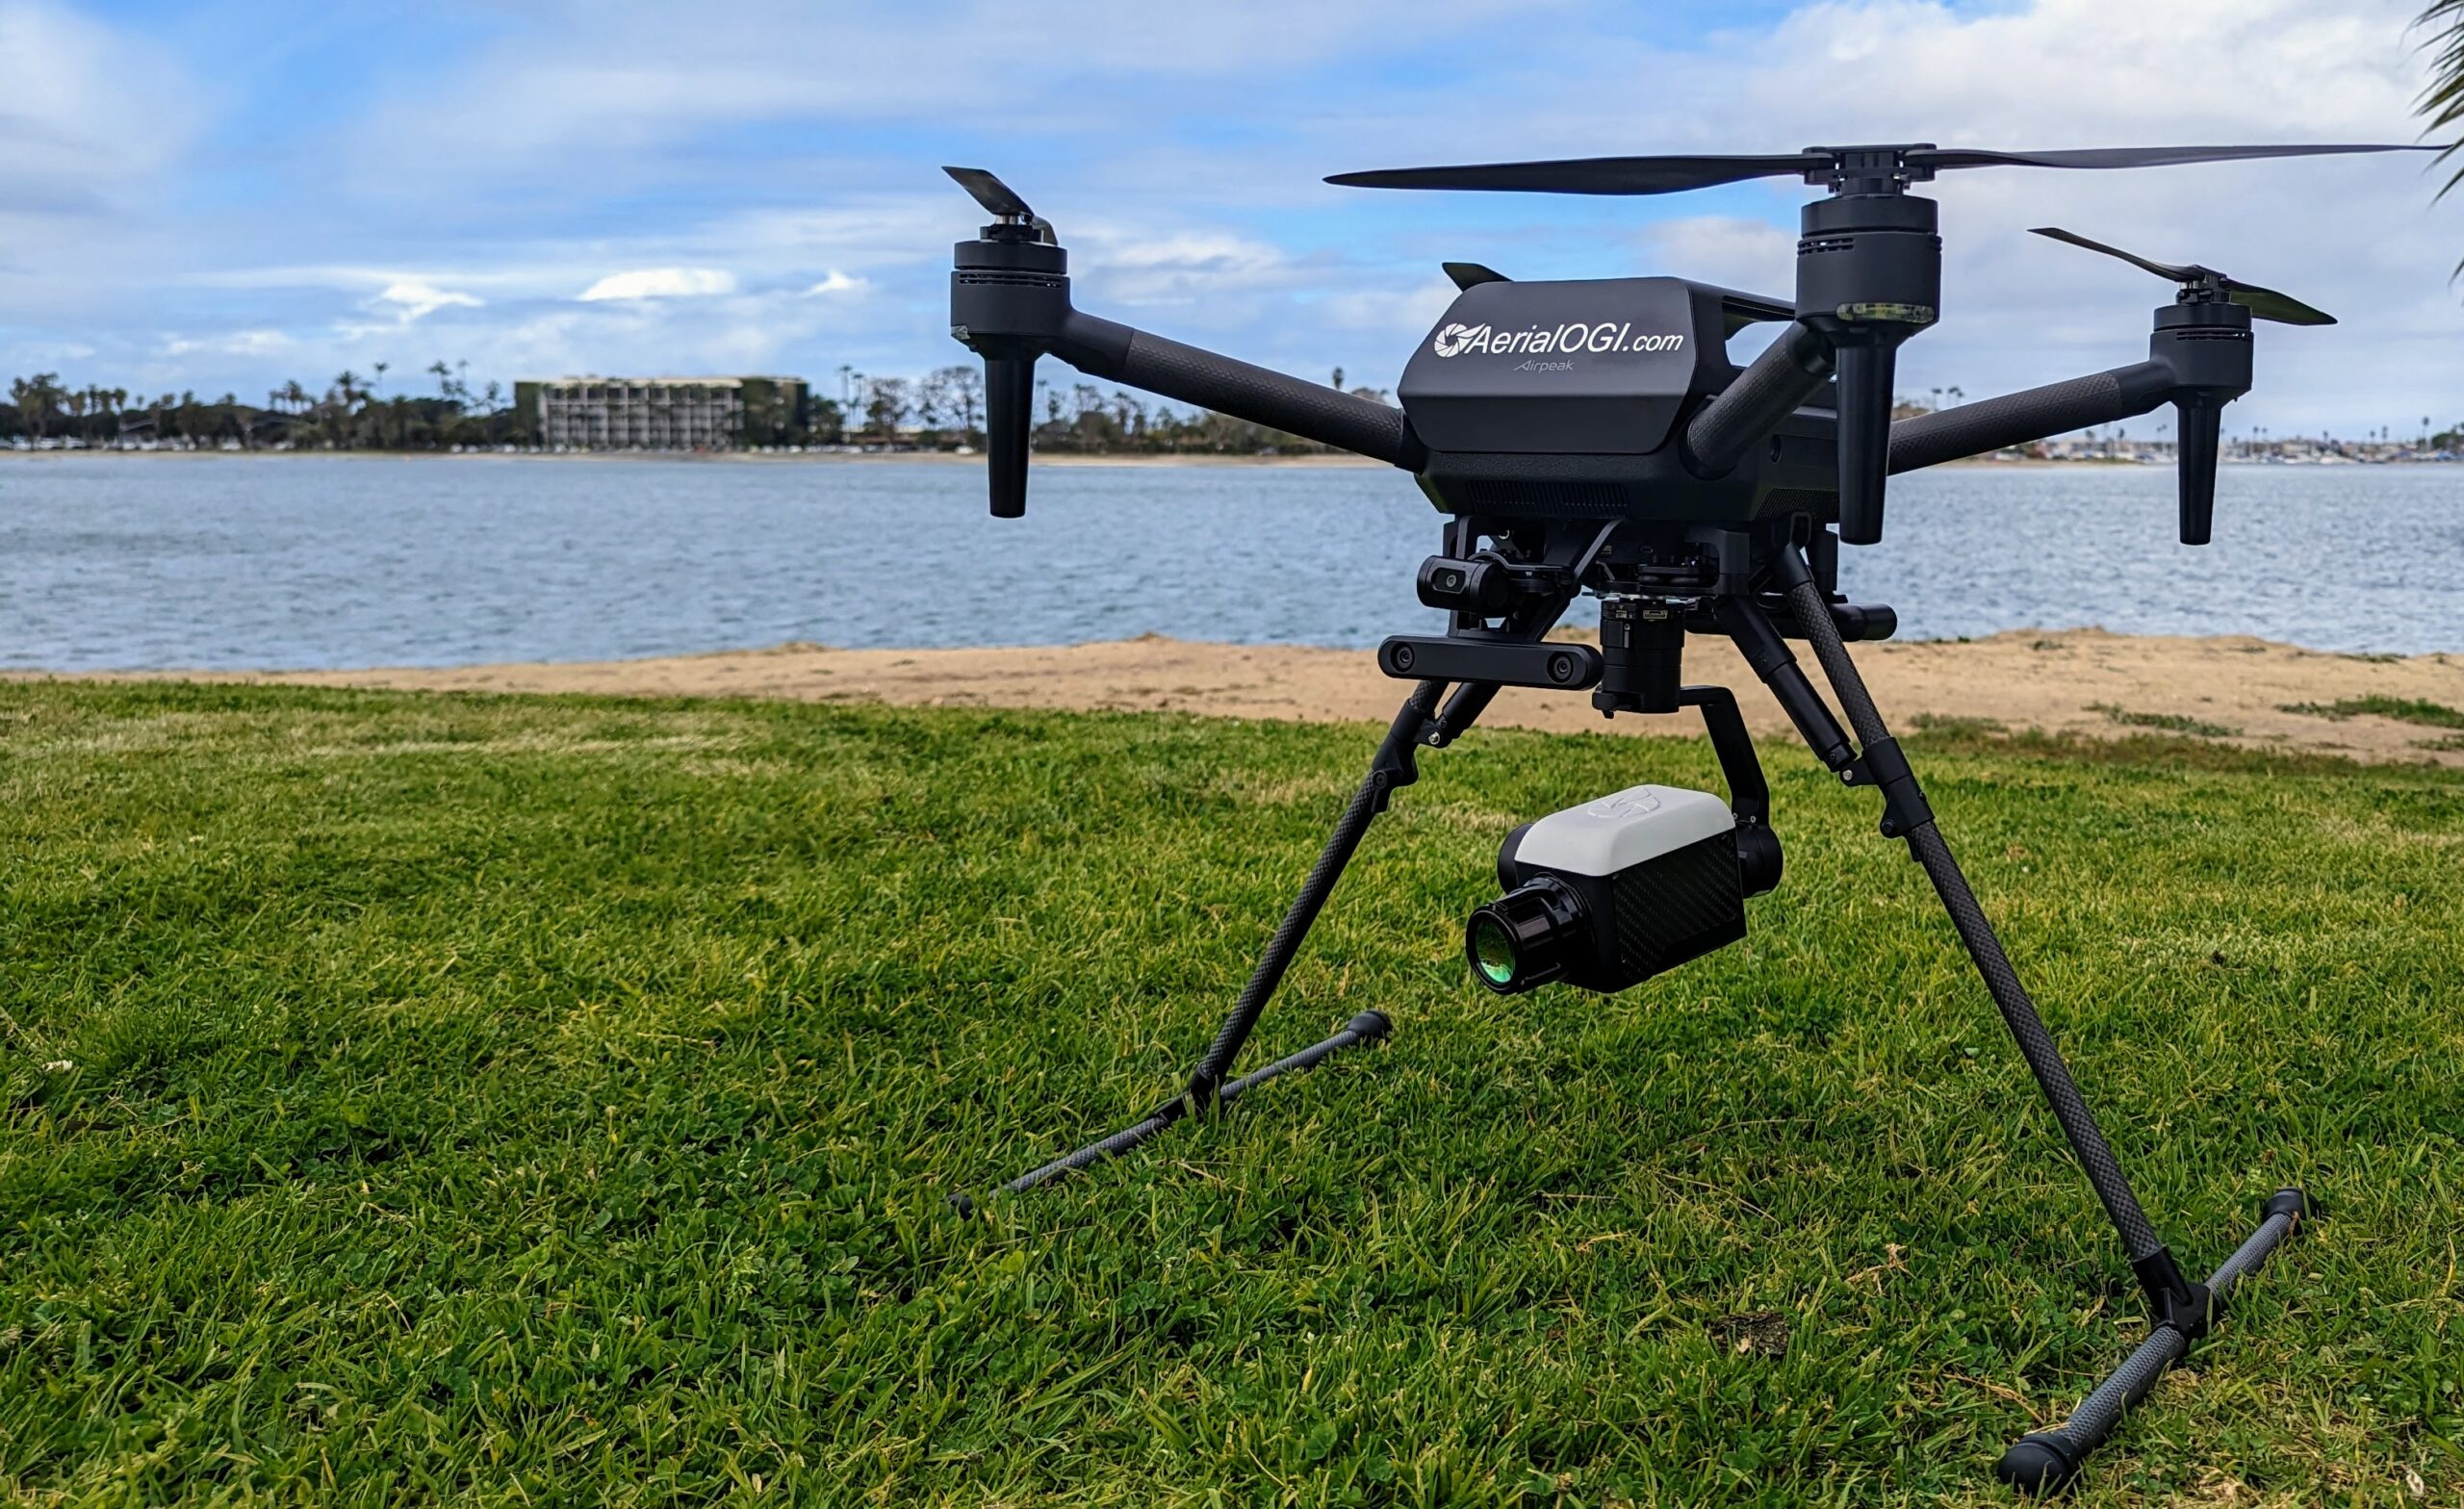 Sony Airpeak drone with AerialOGI's Optical gas imaging (OGI) payload for leak detection